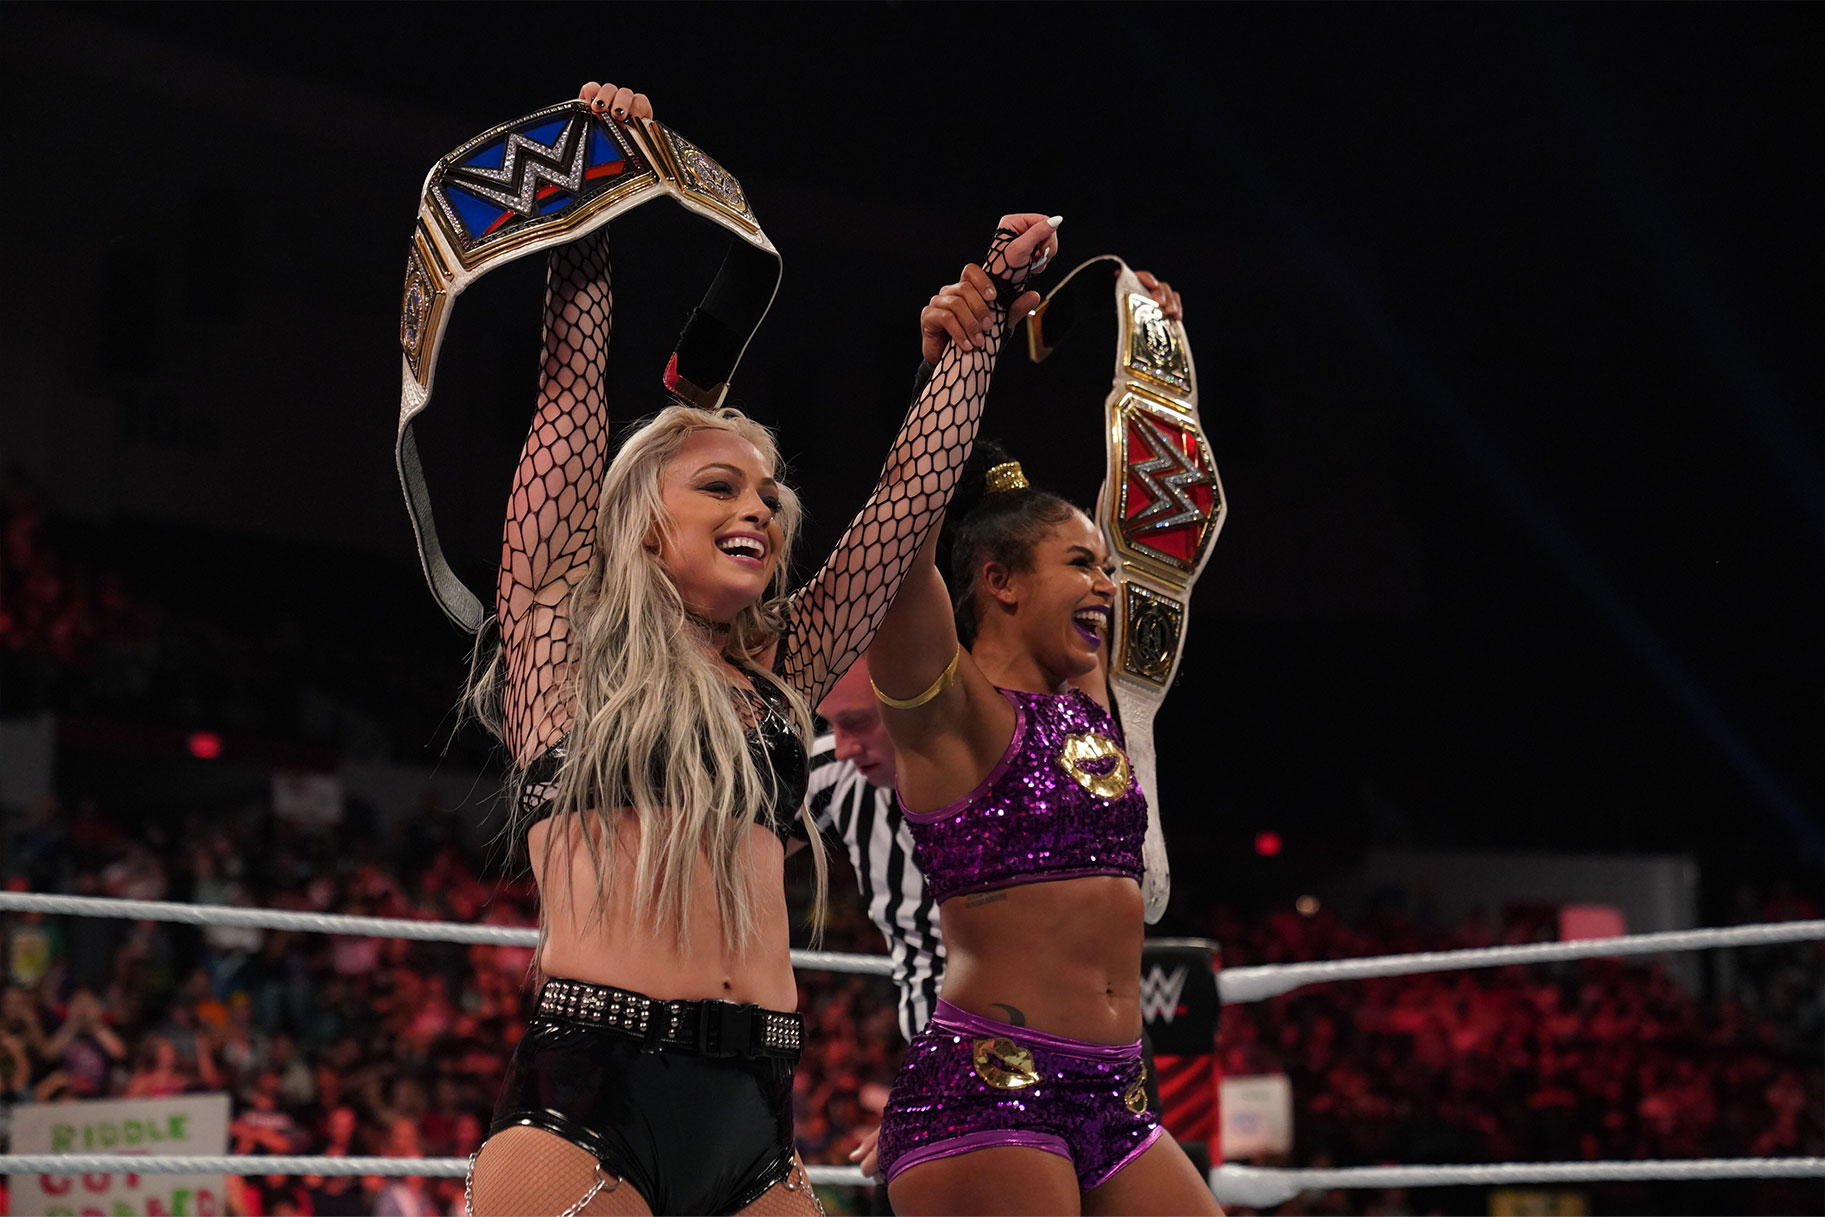 Liv Morgan and Bianca Belair lifting their belts into the air